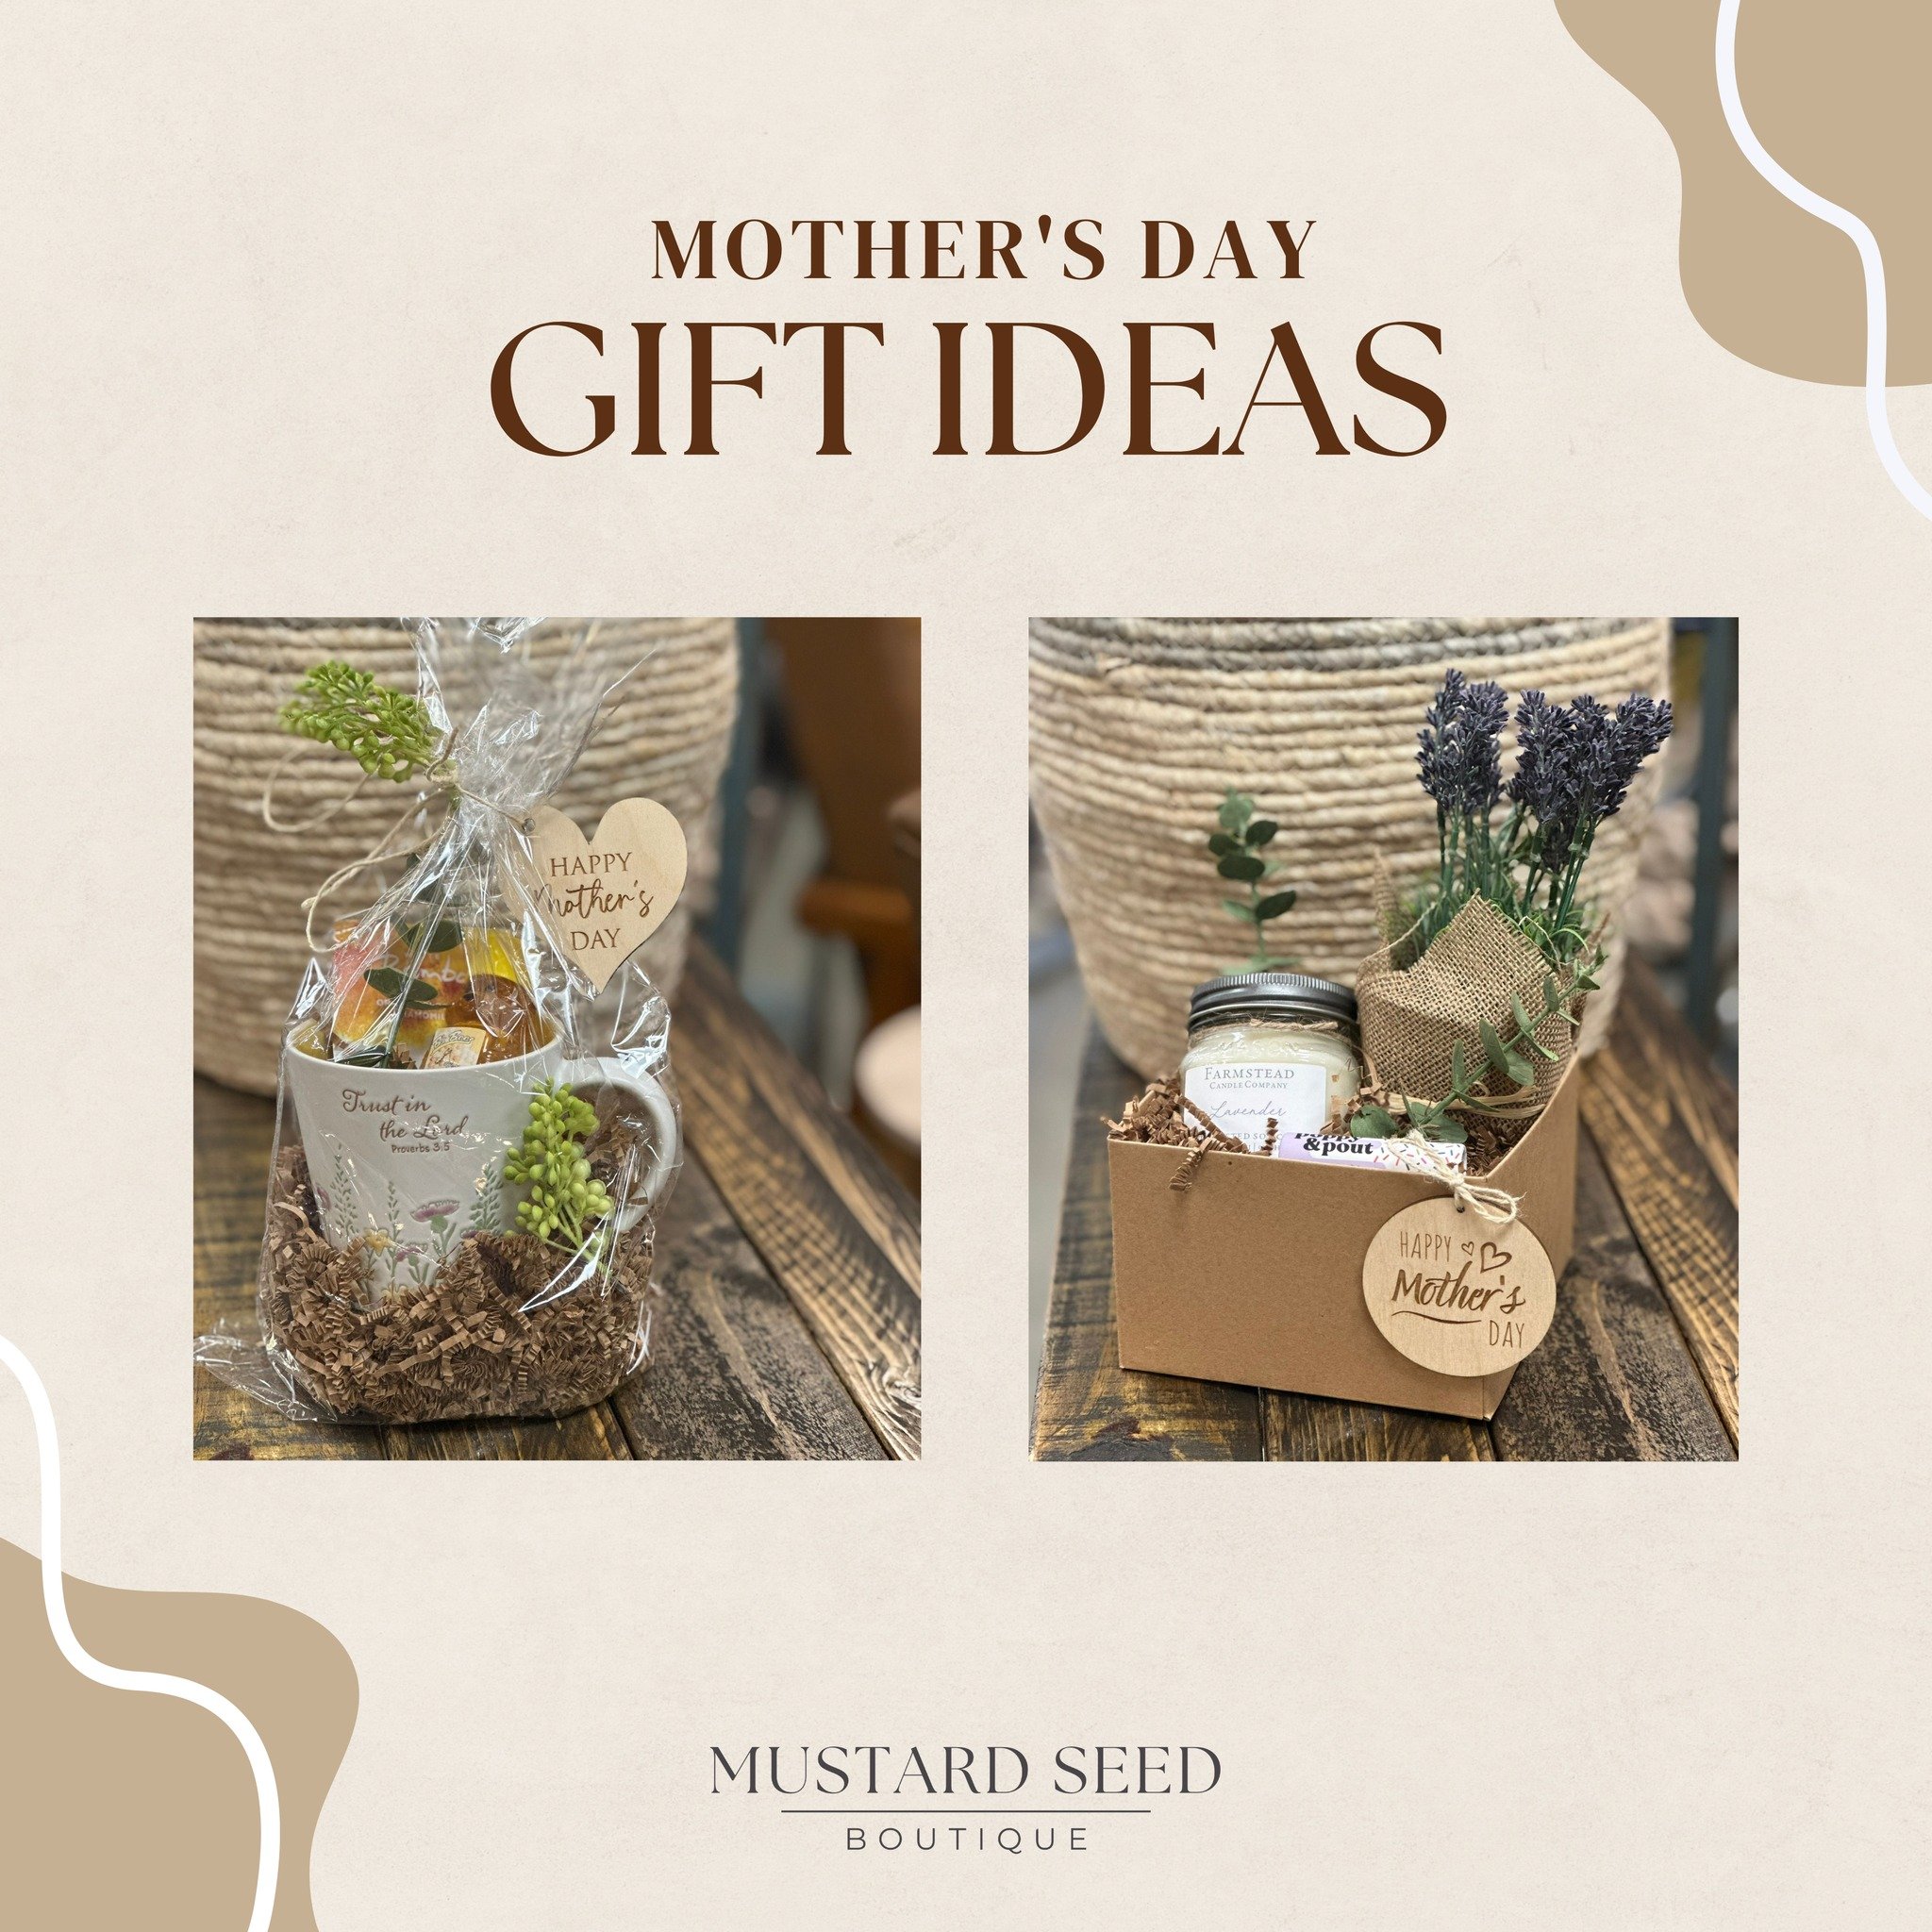 Wrap up the love this Mother's Day with our exclusive bundles! Thoughtfully curated to make every mom feel special. 🌸

#mothersday #mothersdaygiftinspo #eauclaire #mustardseedboutique